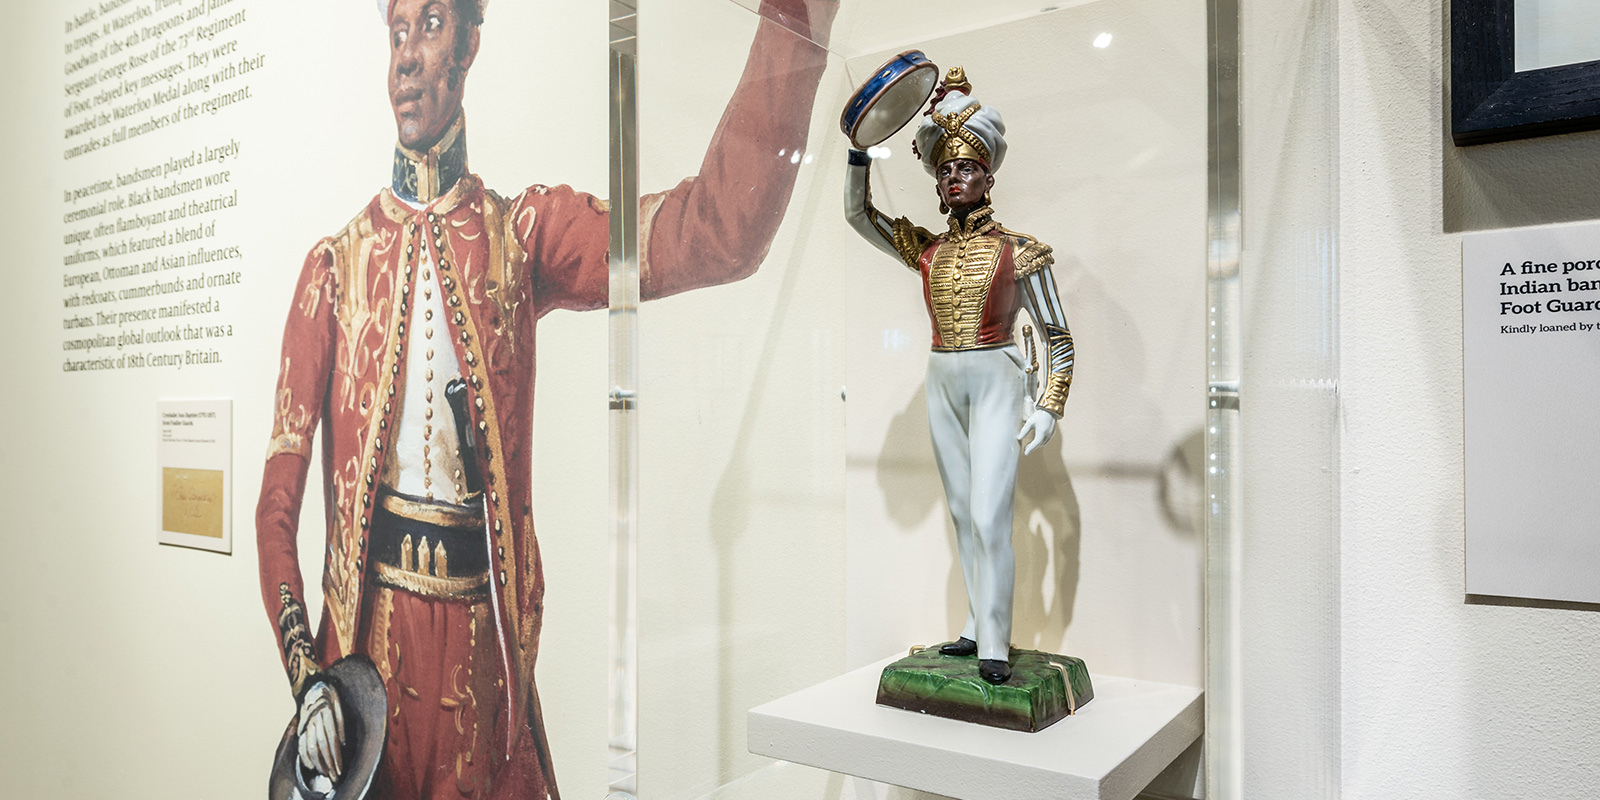 Porcelain statuette of a West Indian bandsman in the Grenadiers, mid- to late-18th century